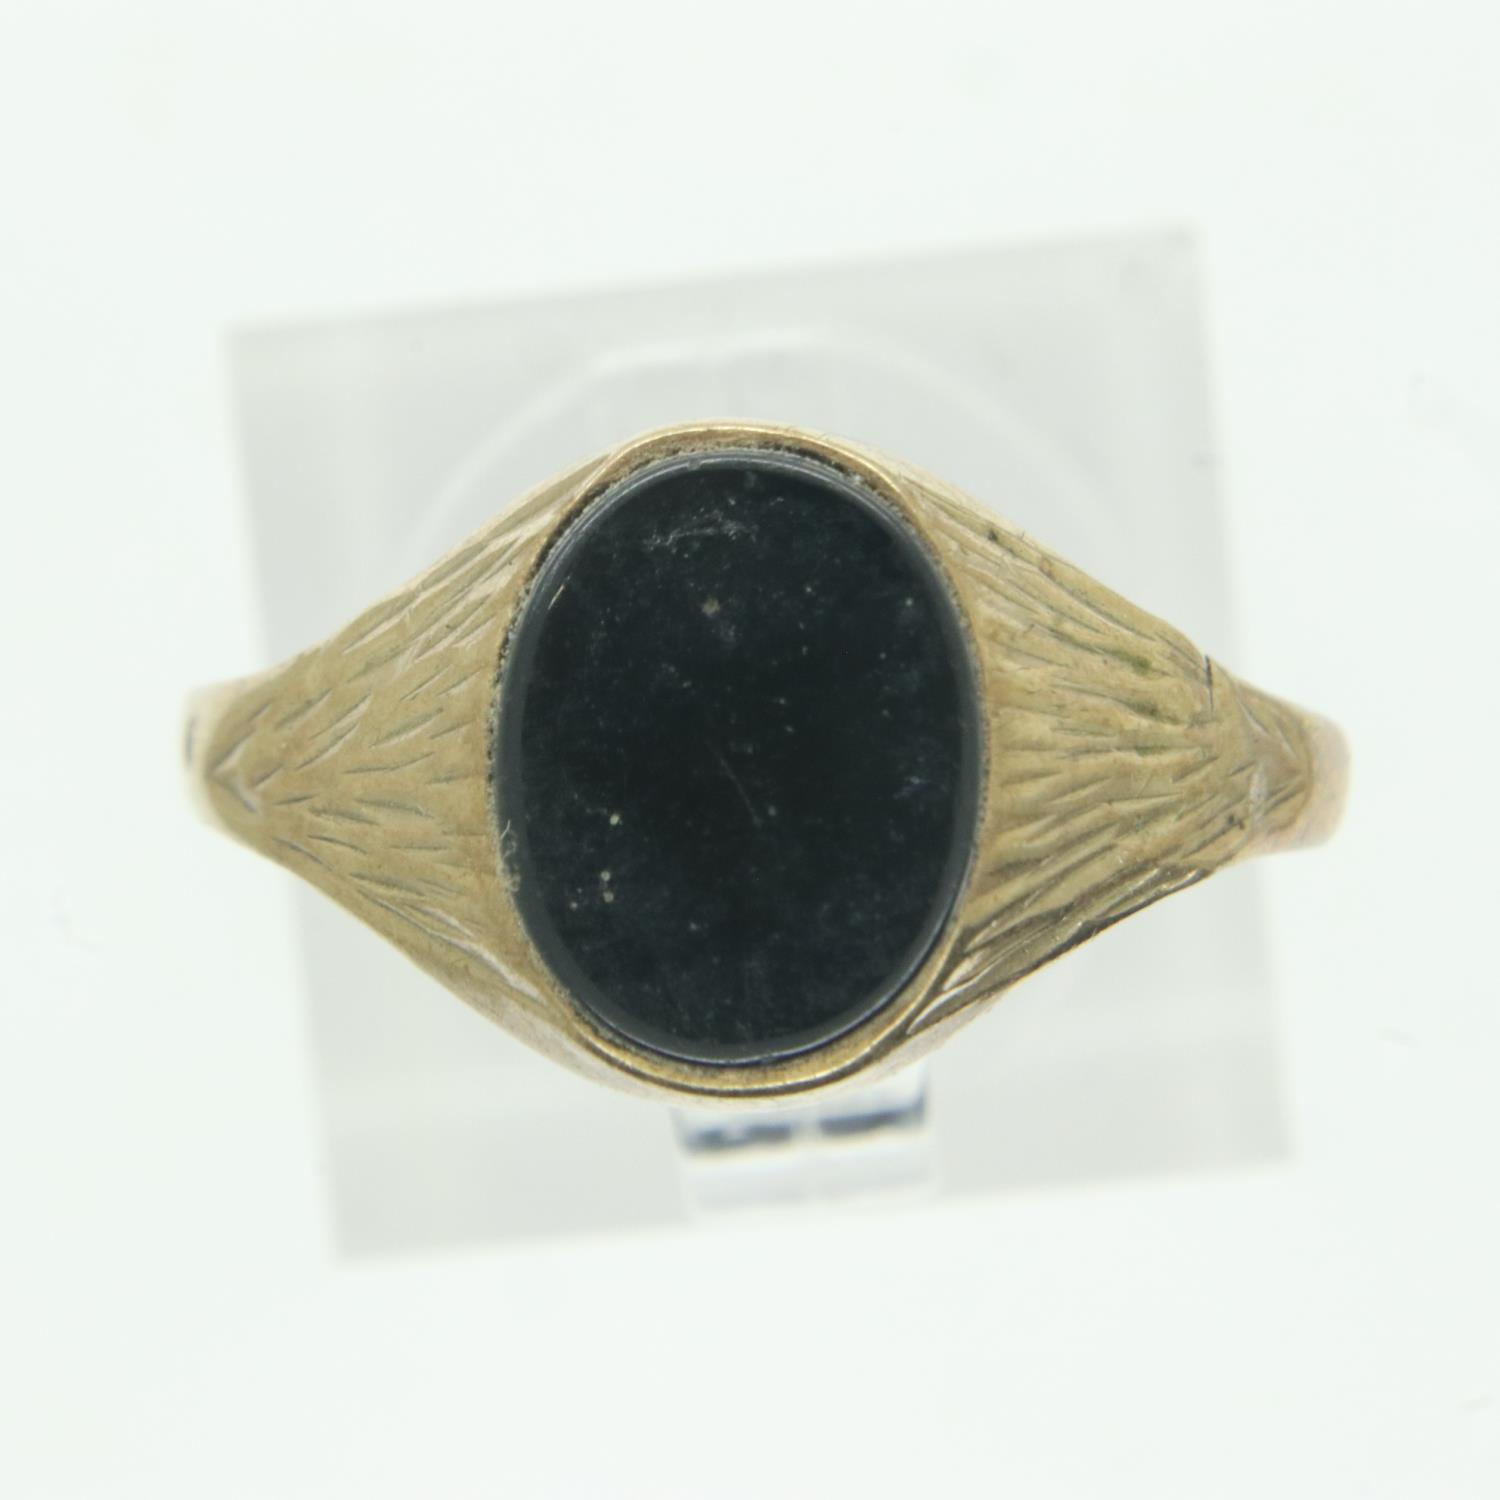 9ct gold onyx set signet ring, size S/T, 1.6g. UK P&P Group 0 (£6+VAT for the first lot and £1+VAT